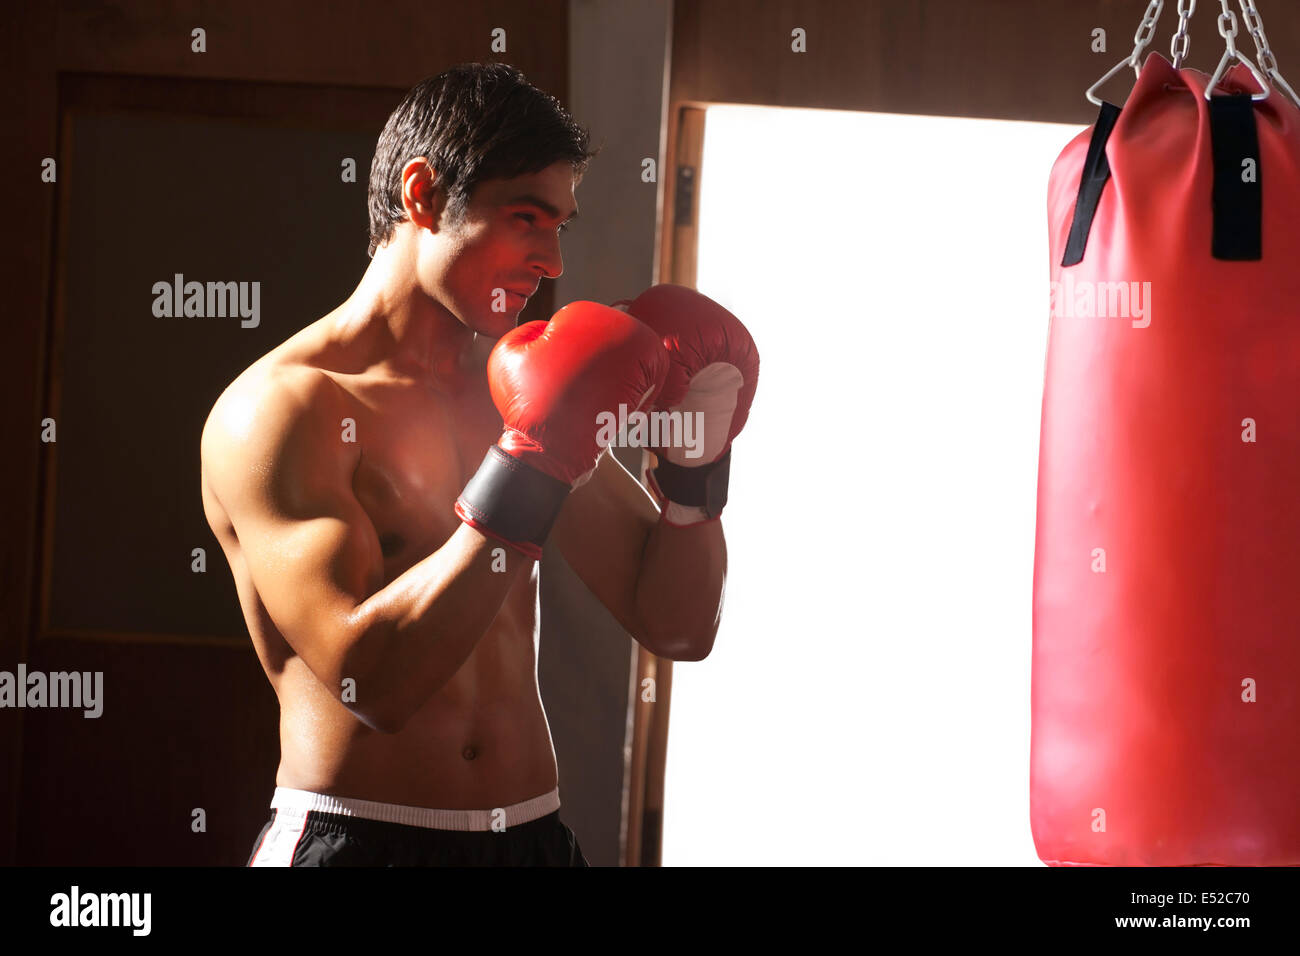 Young shirtless man working out with red punching bag in gym Stock Photo